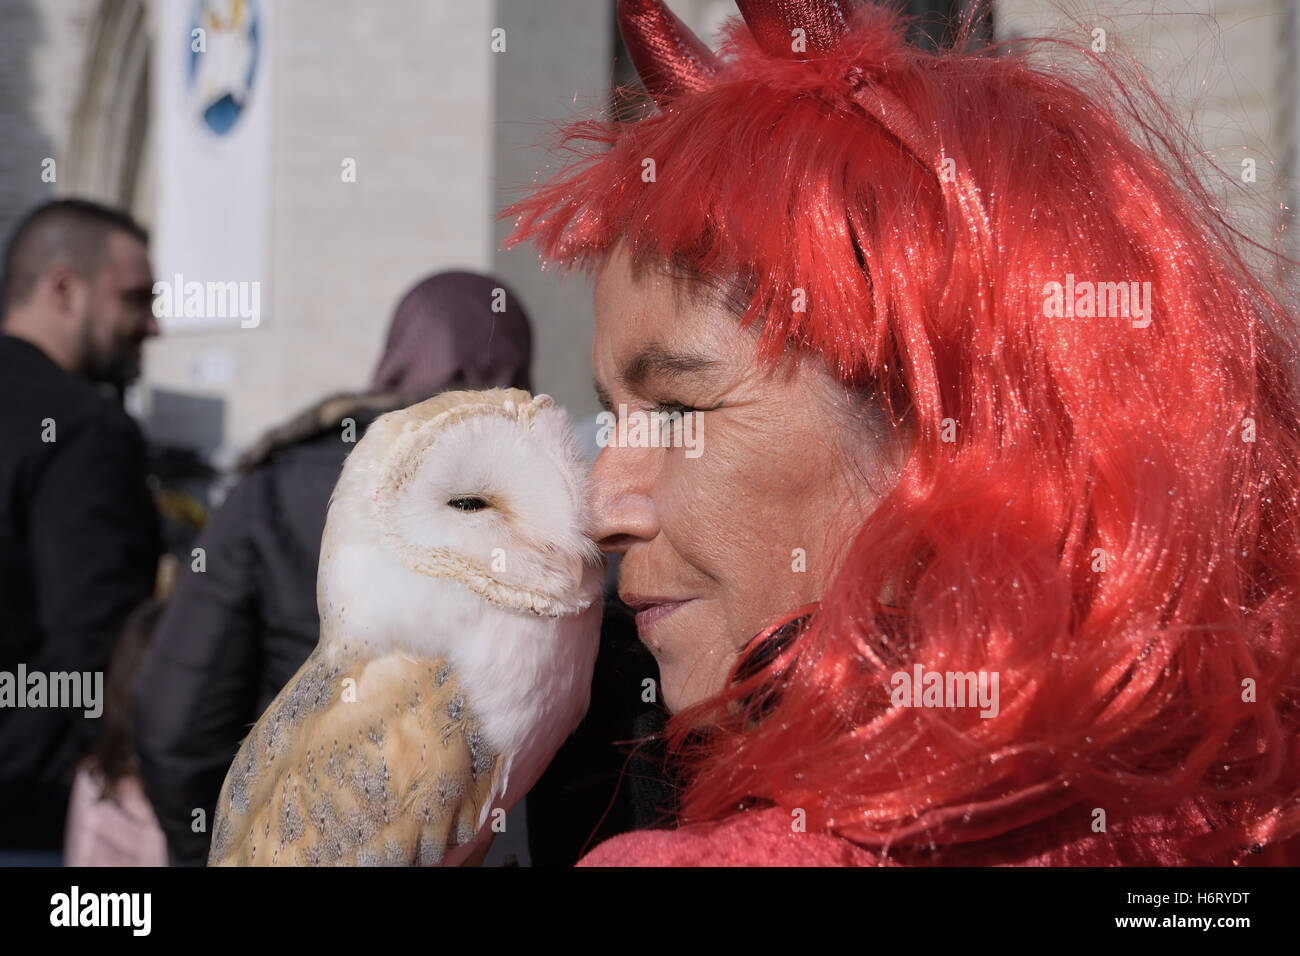 Celebration of Halloween in historical center of city on October 29, 2016 in Halle, Belgium. Performance 'Birds of Heaven' on ce Stock Photo